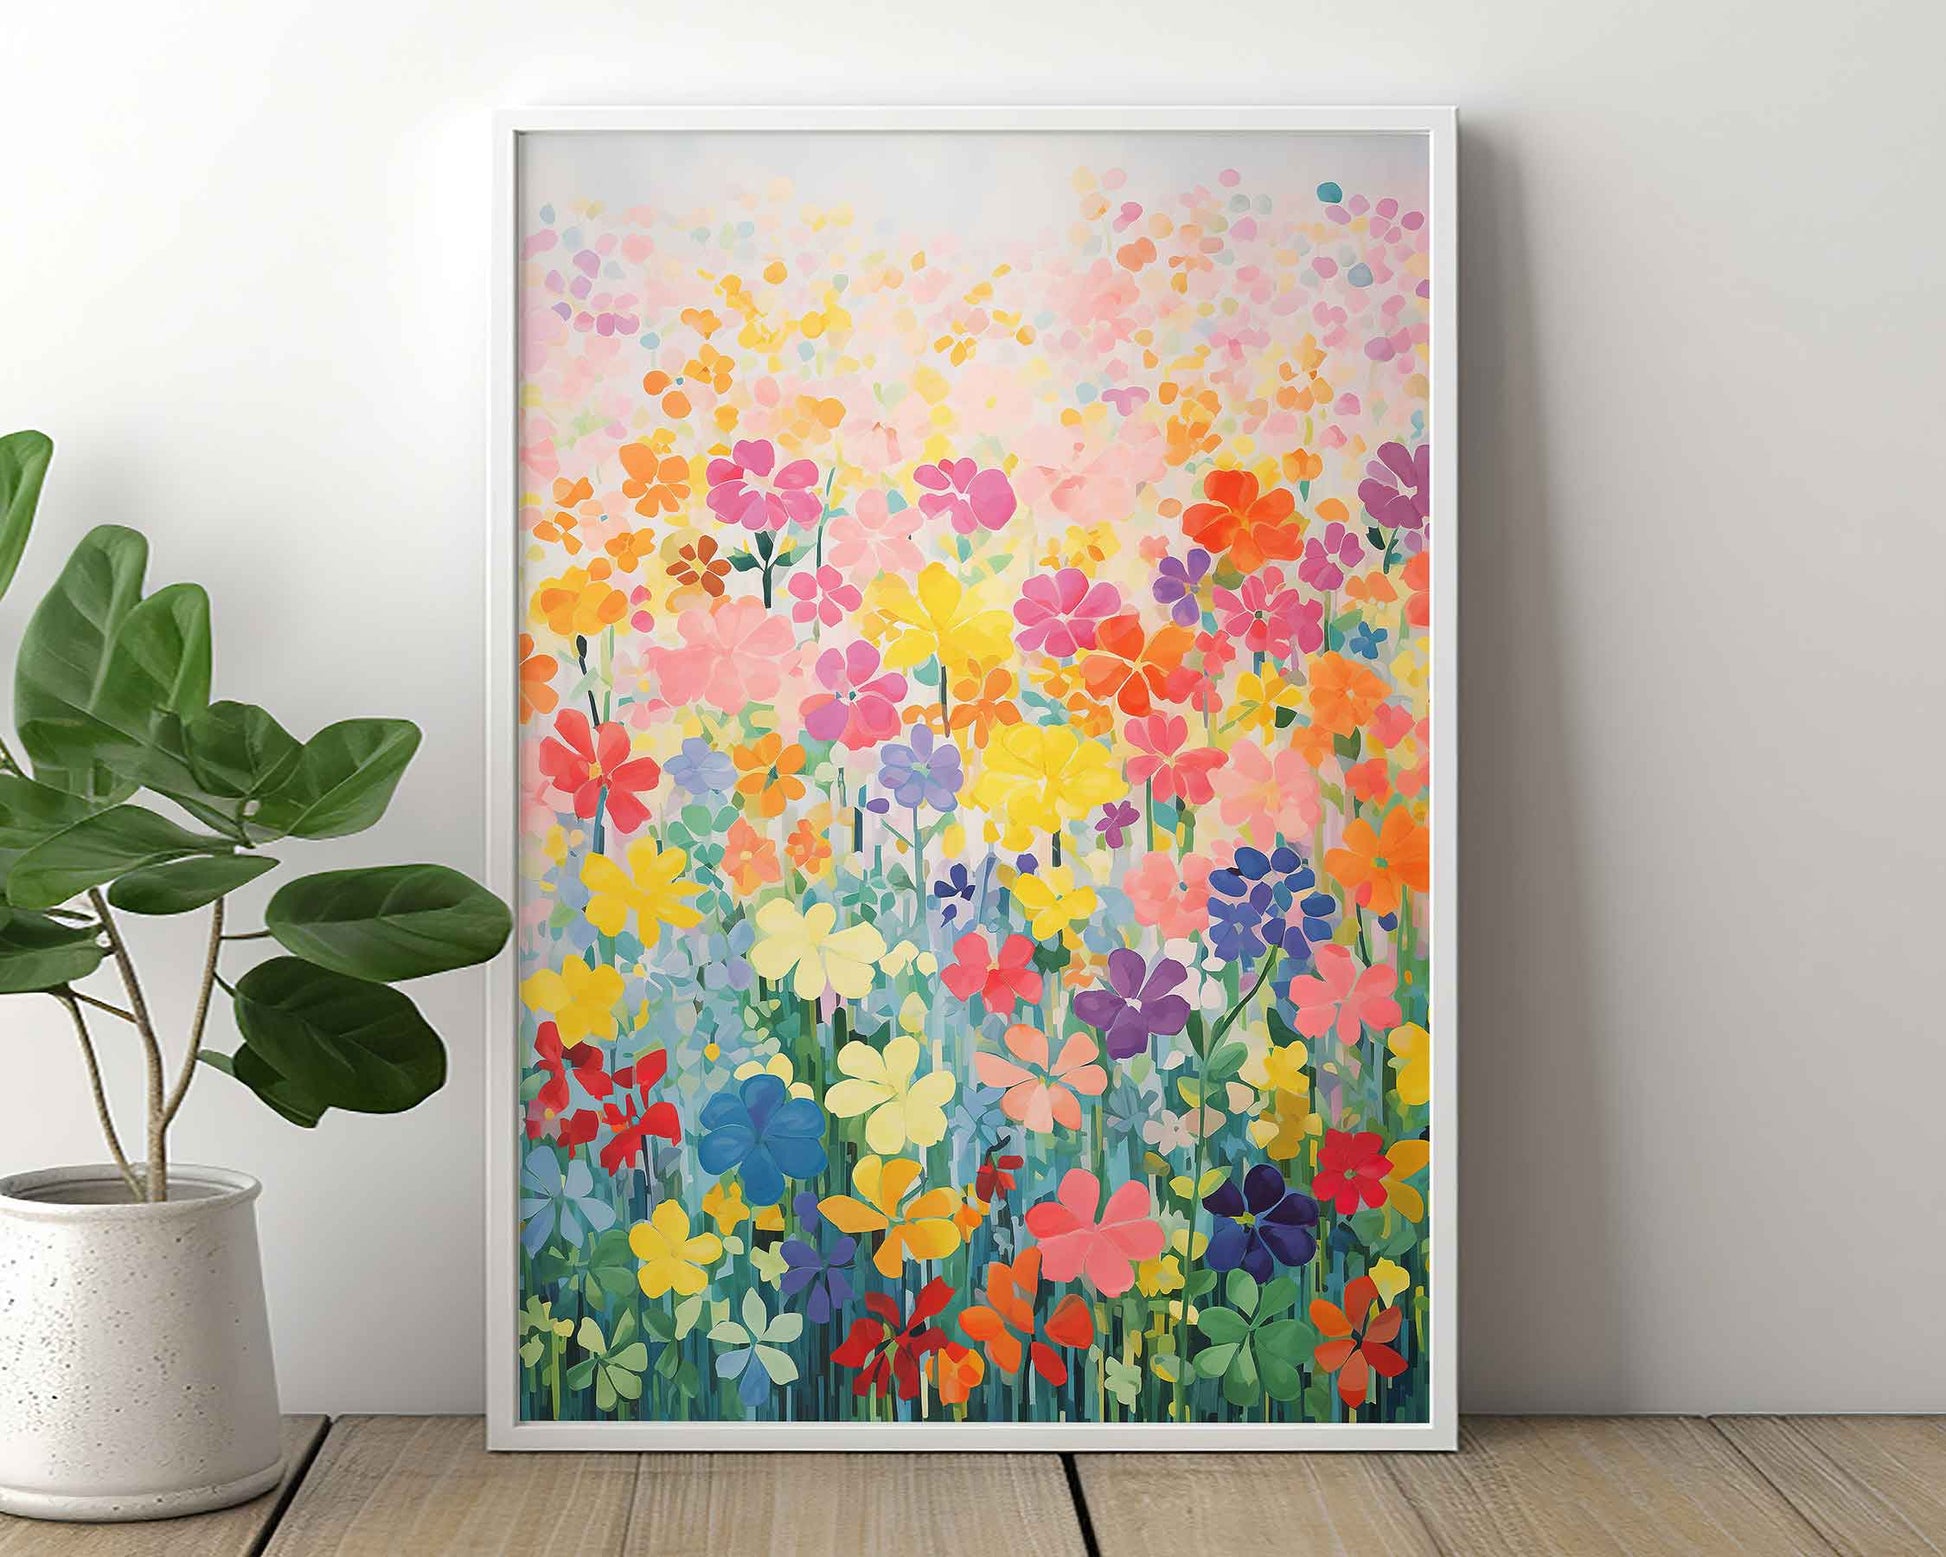 Framed Image of Expressionist Colourful Flowers Wall Art Print Poster